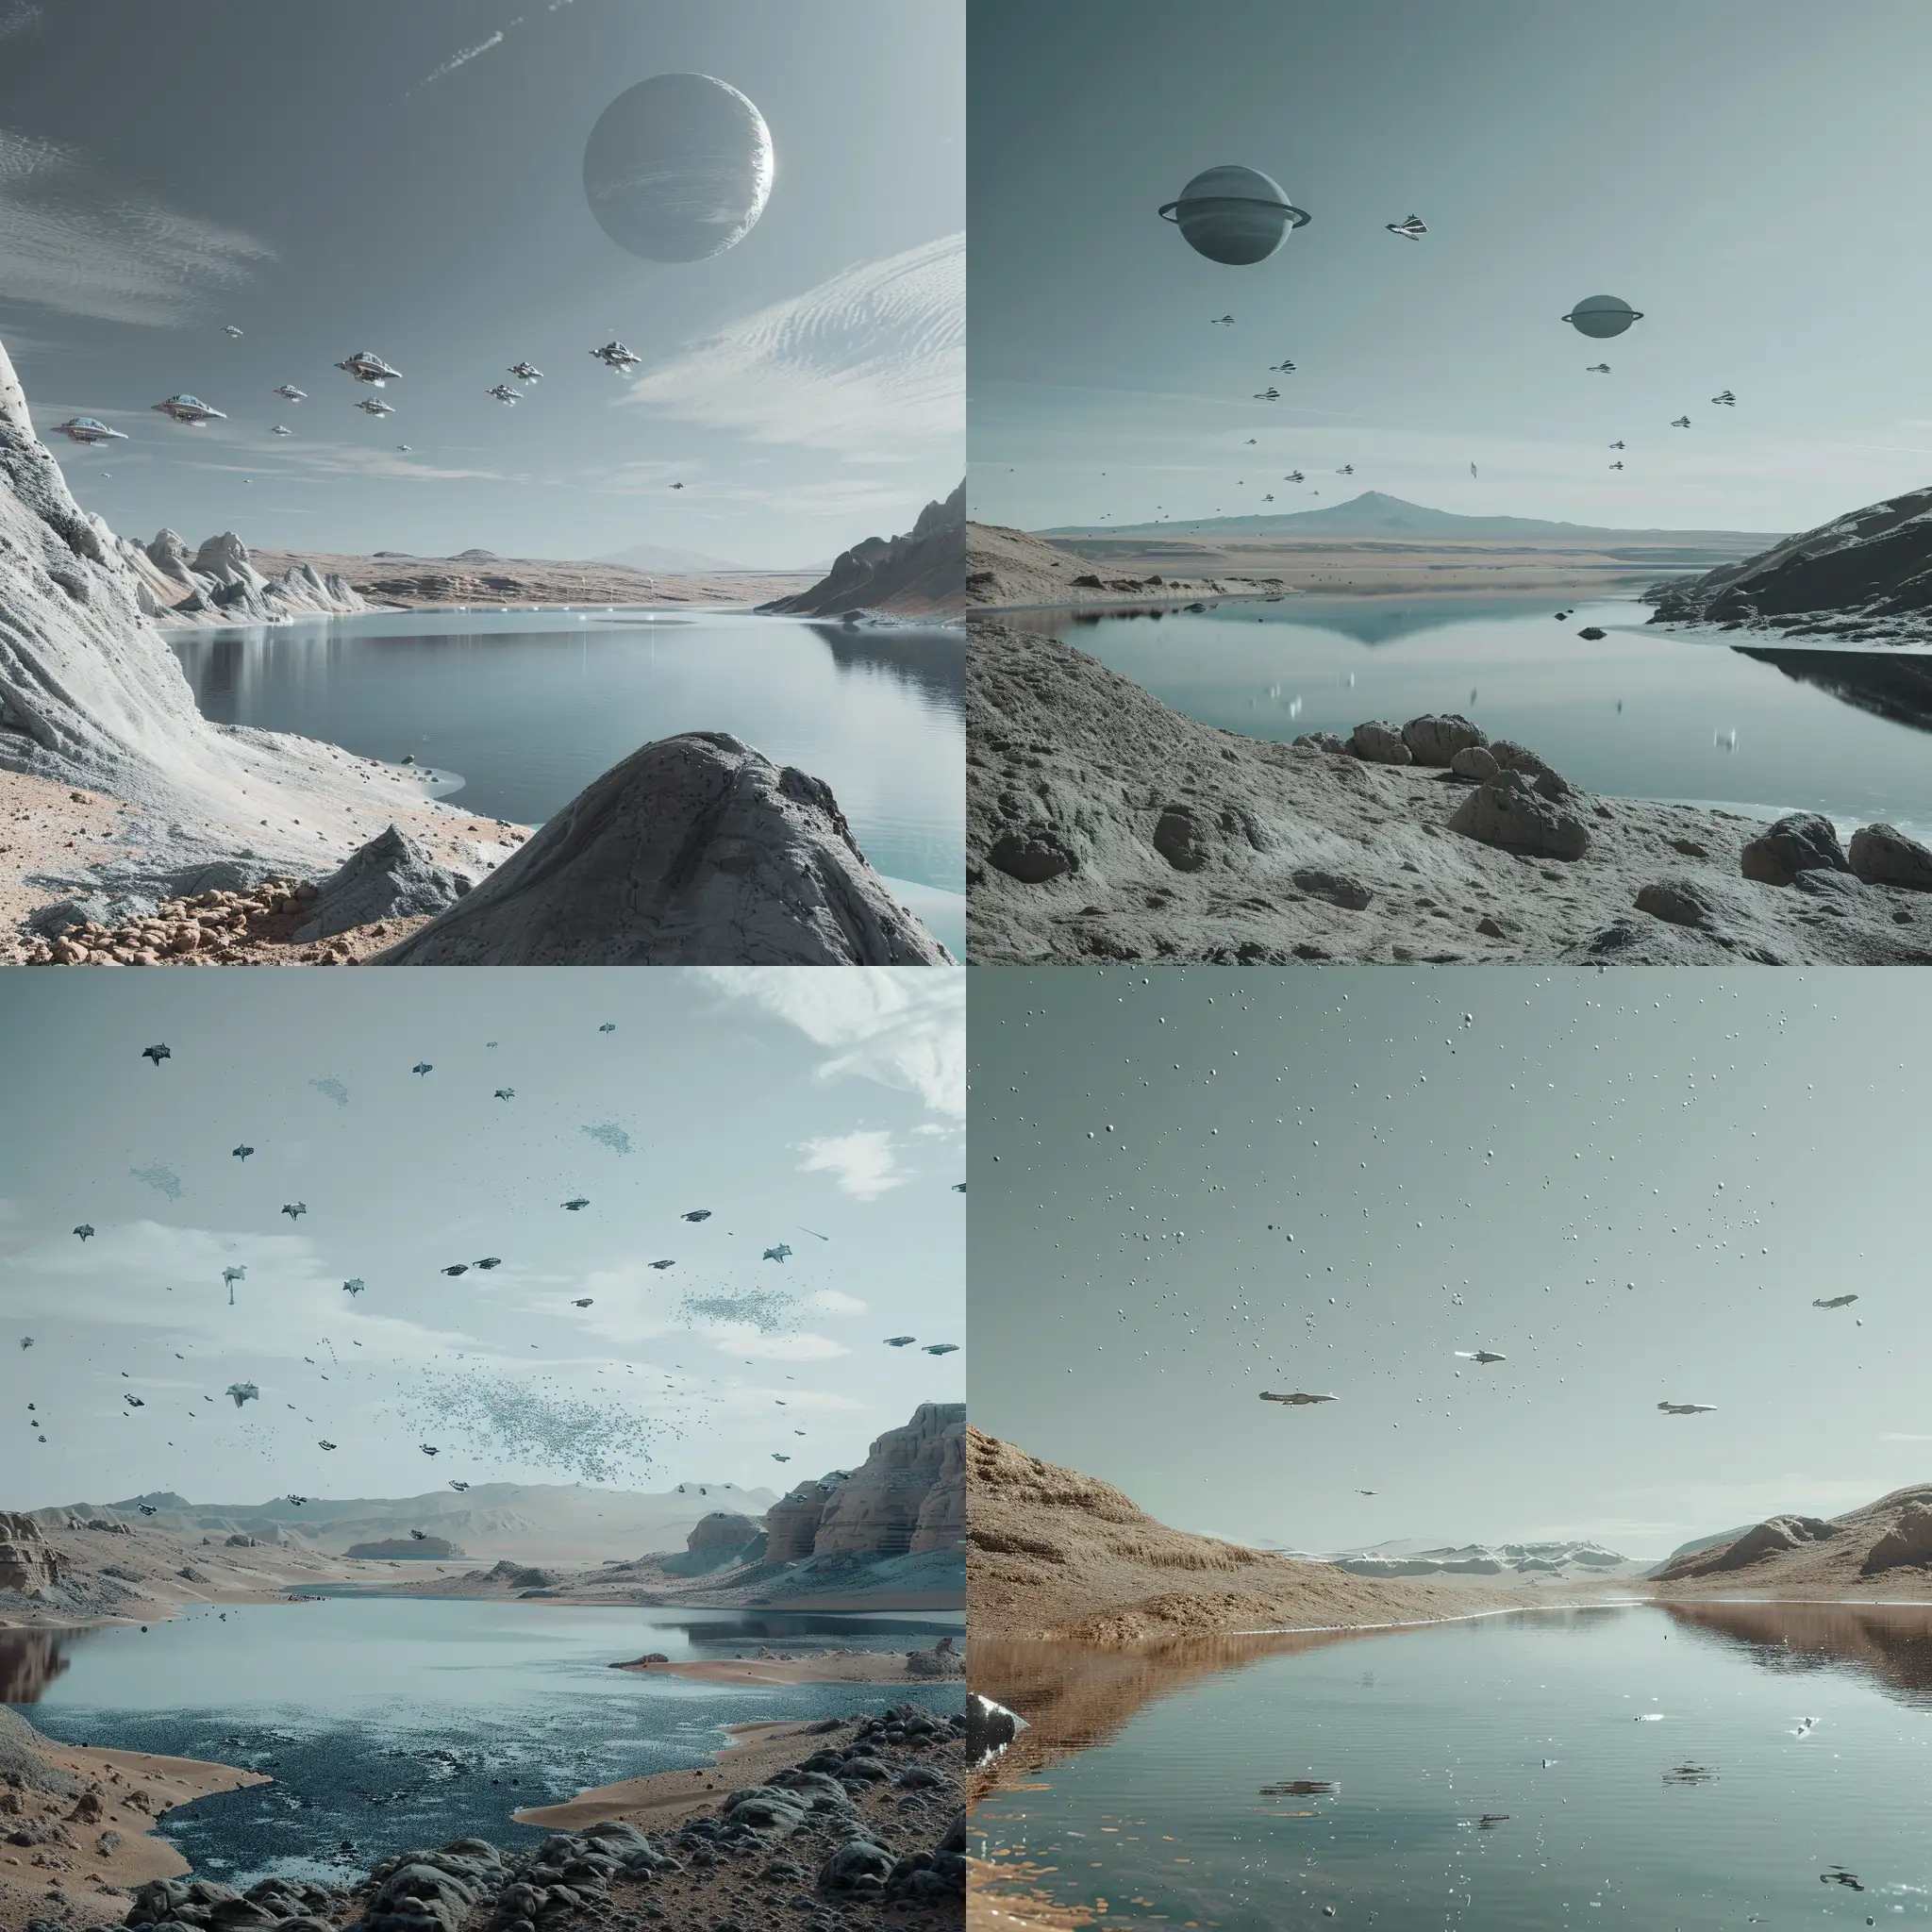 Cosmic-Landscape-Fantastic-Planet-Inspired-by-Dune-Movie-with-Spaceships-and-Lake